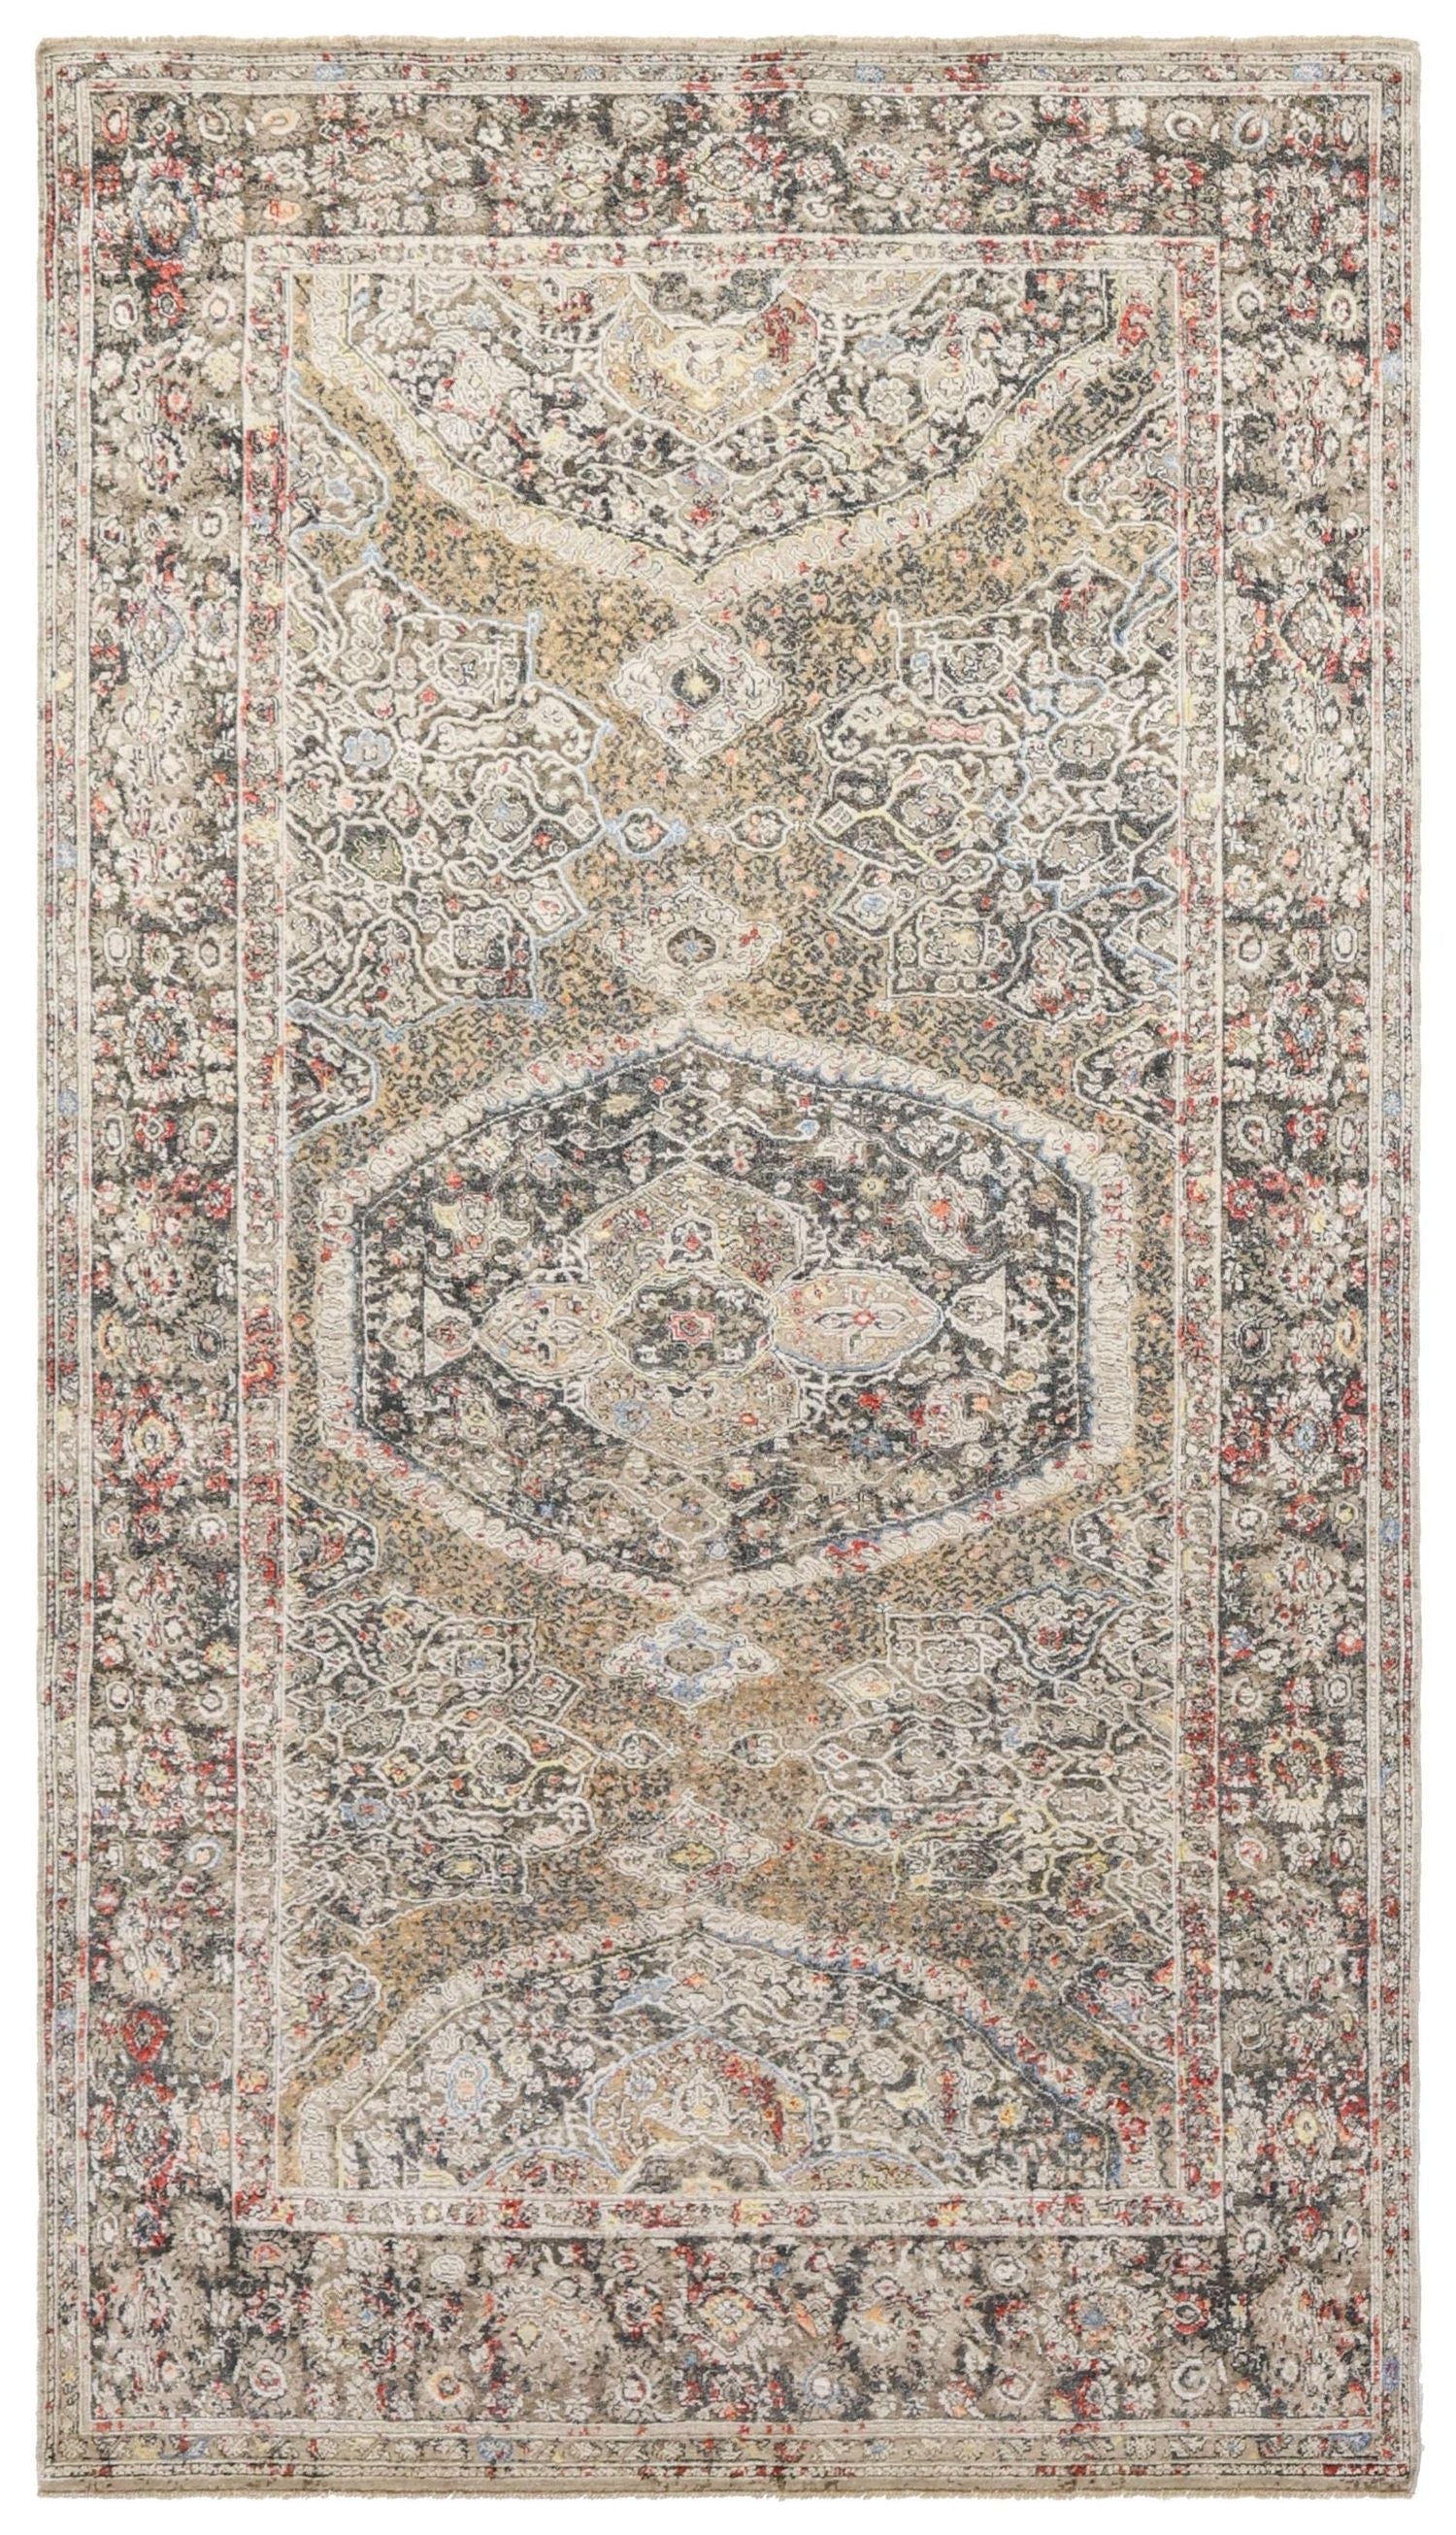 Classical Oushak Handwoven Transitional Rug